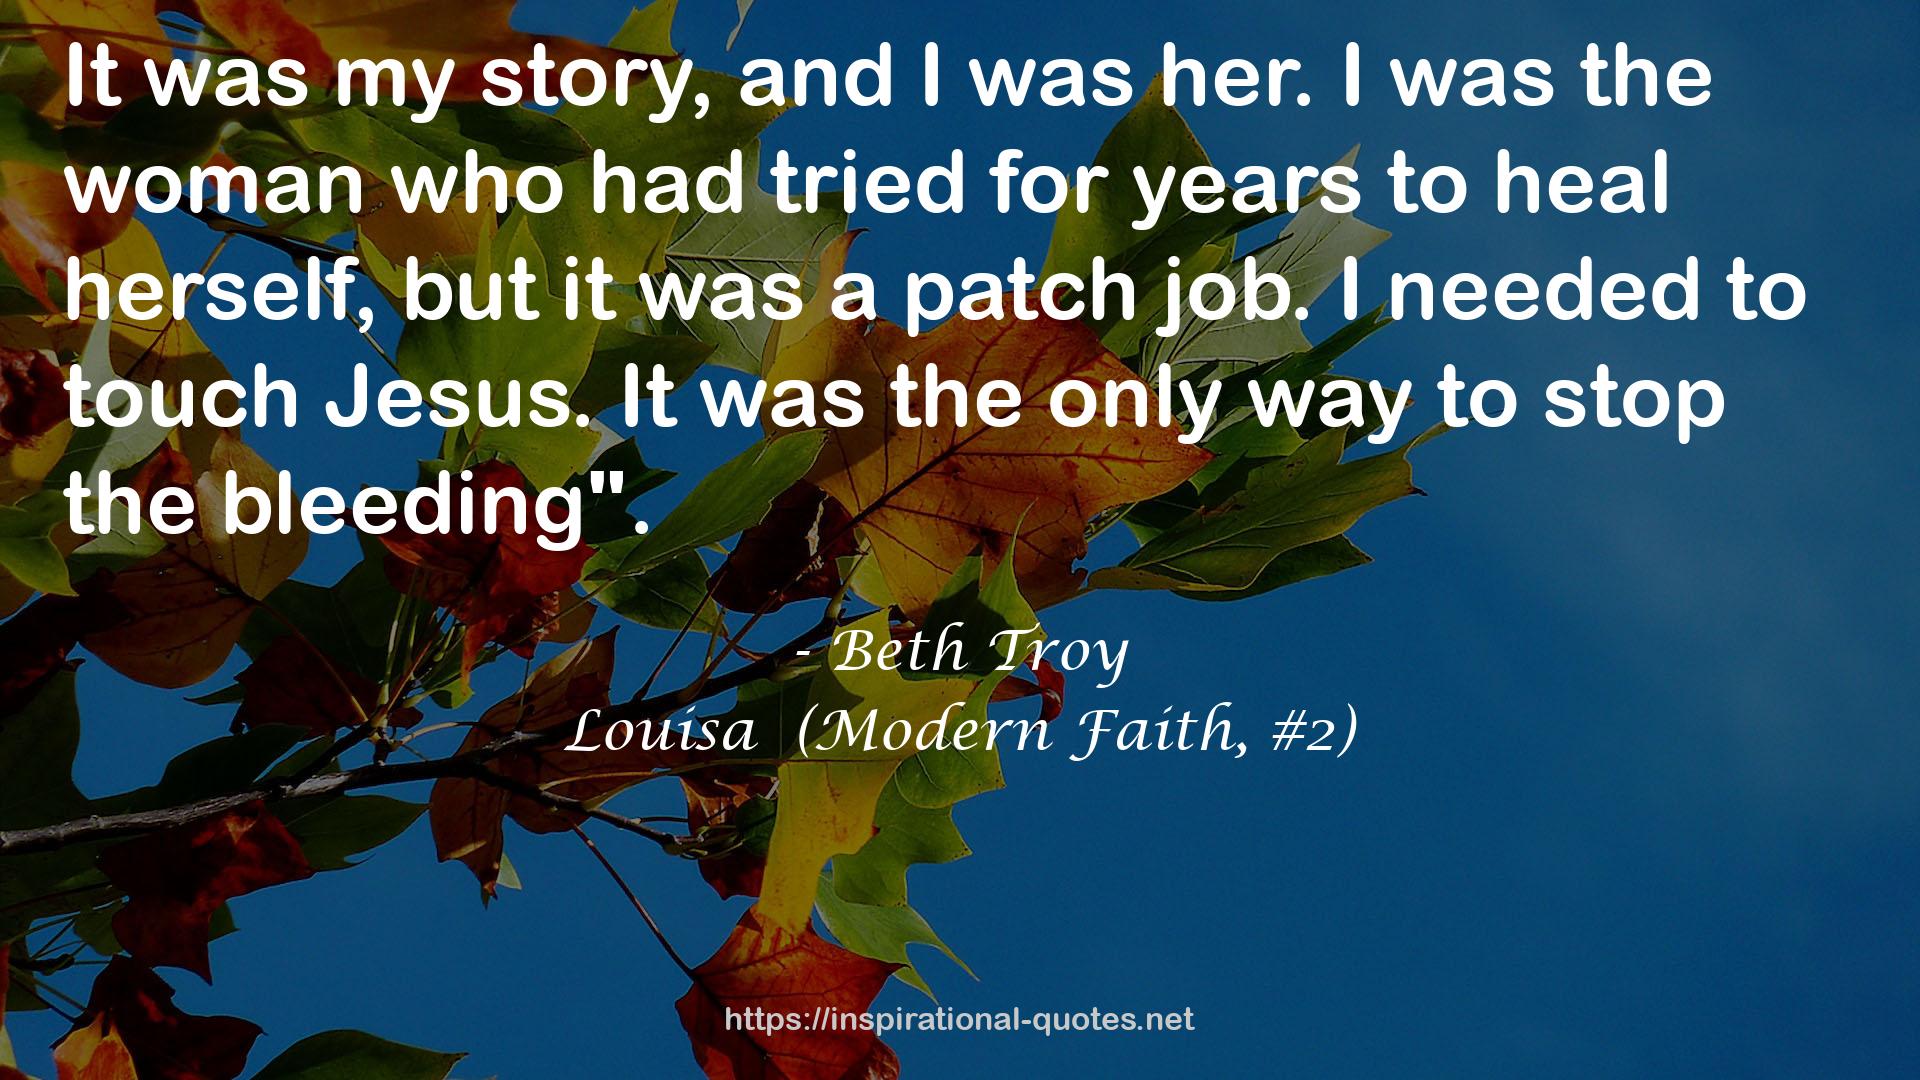 Beth Troy QUOTES